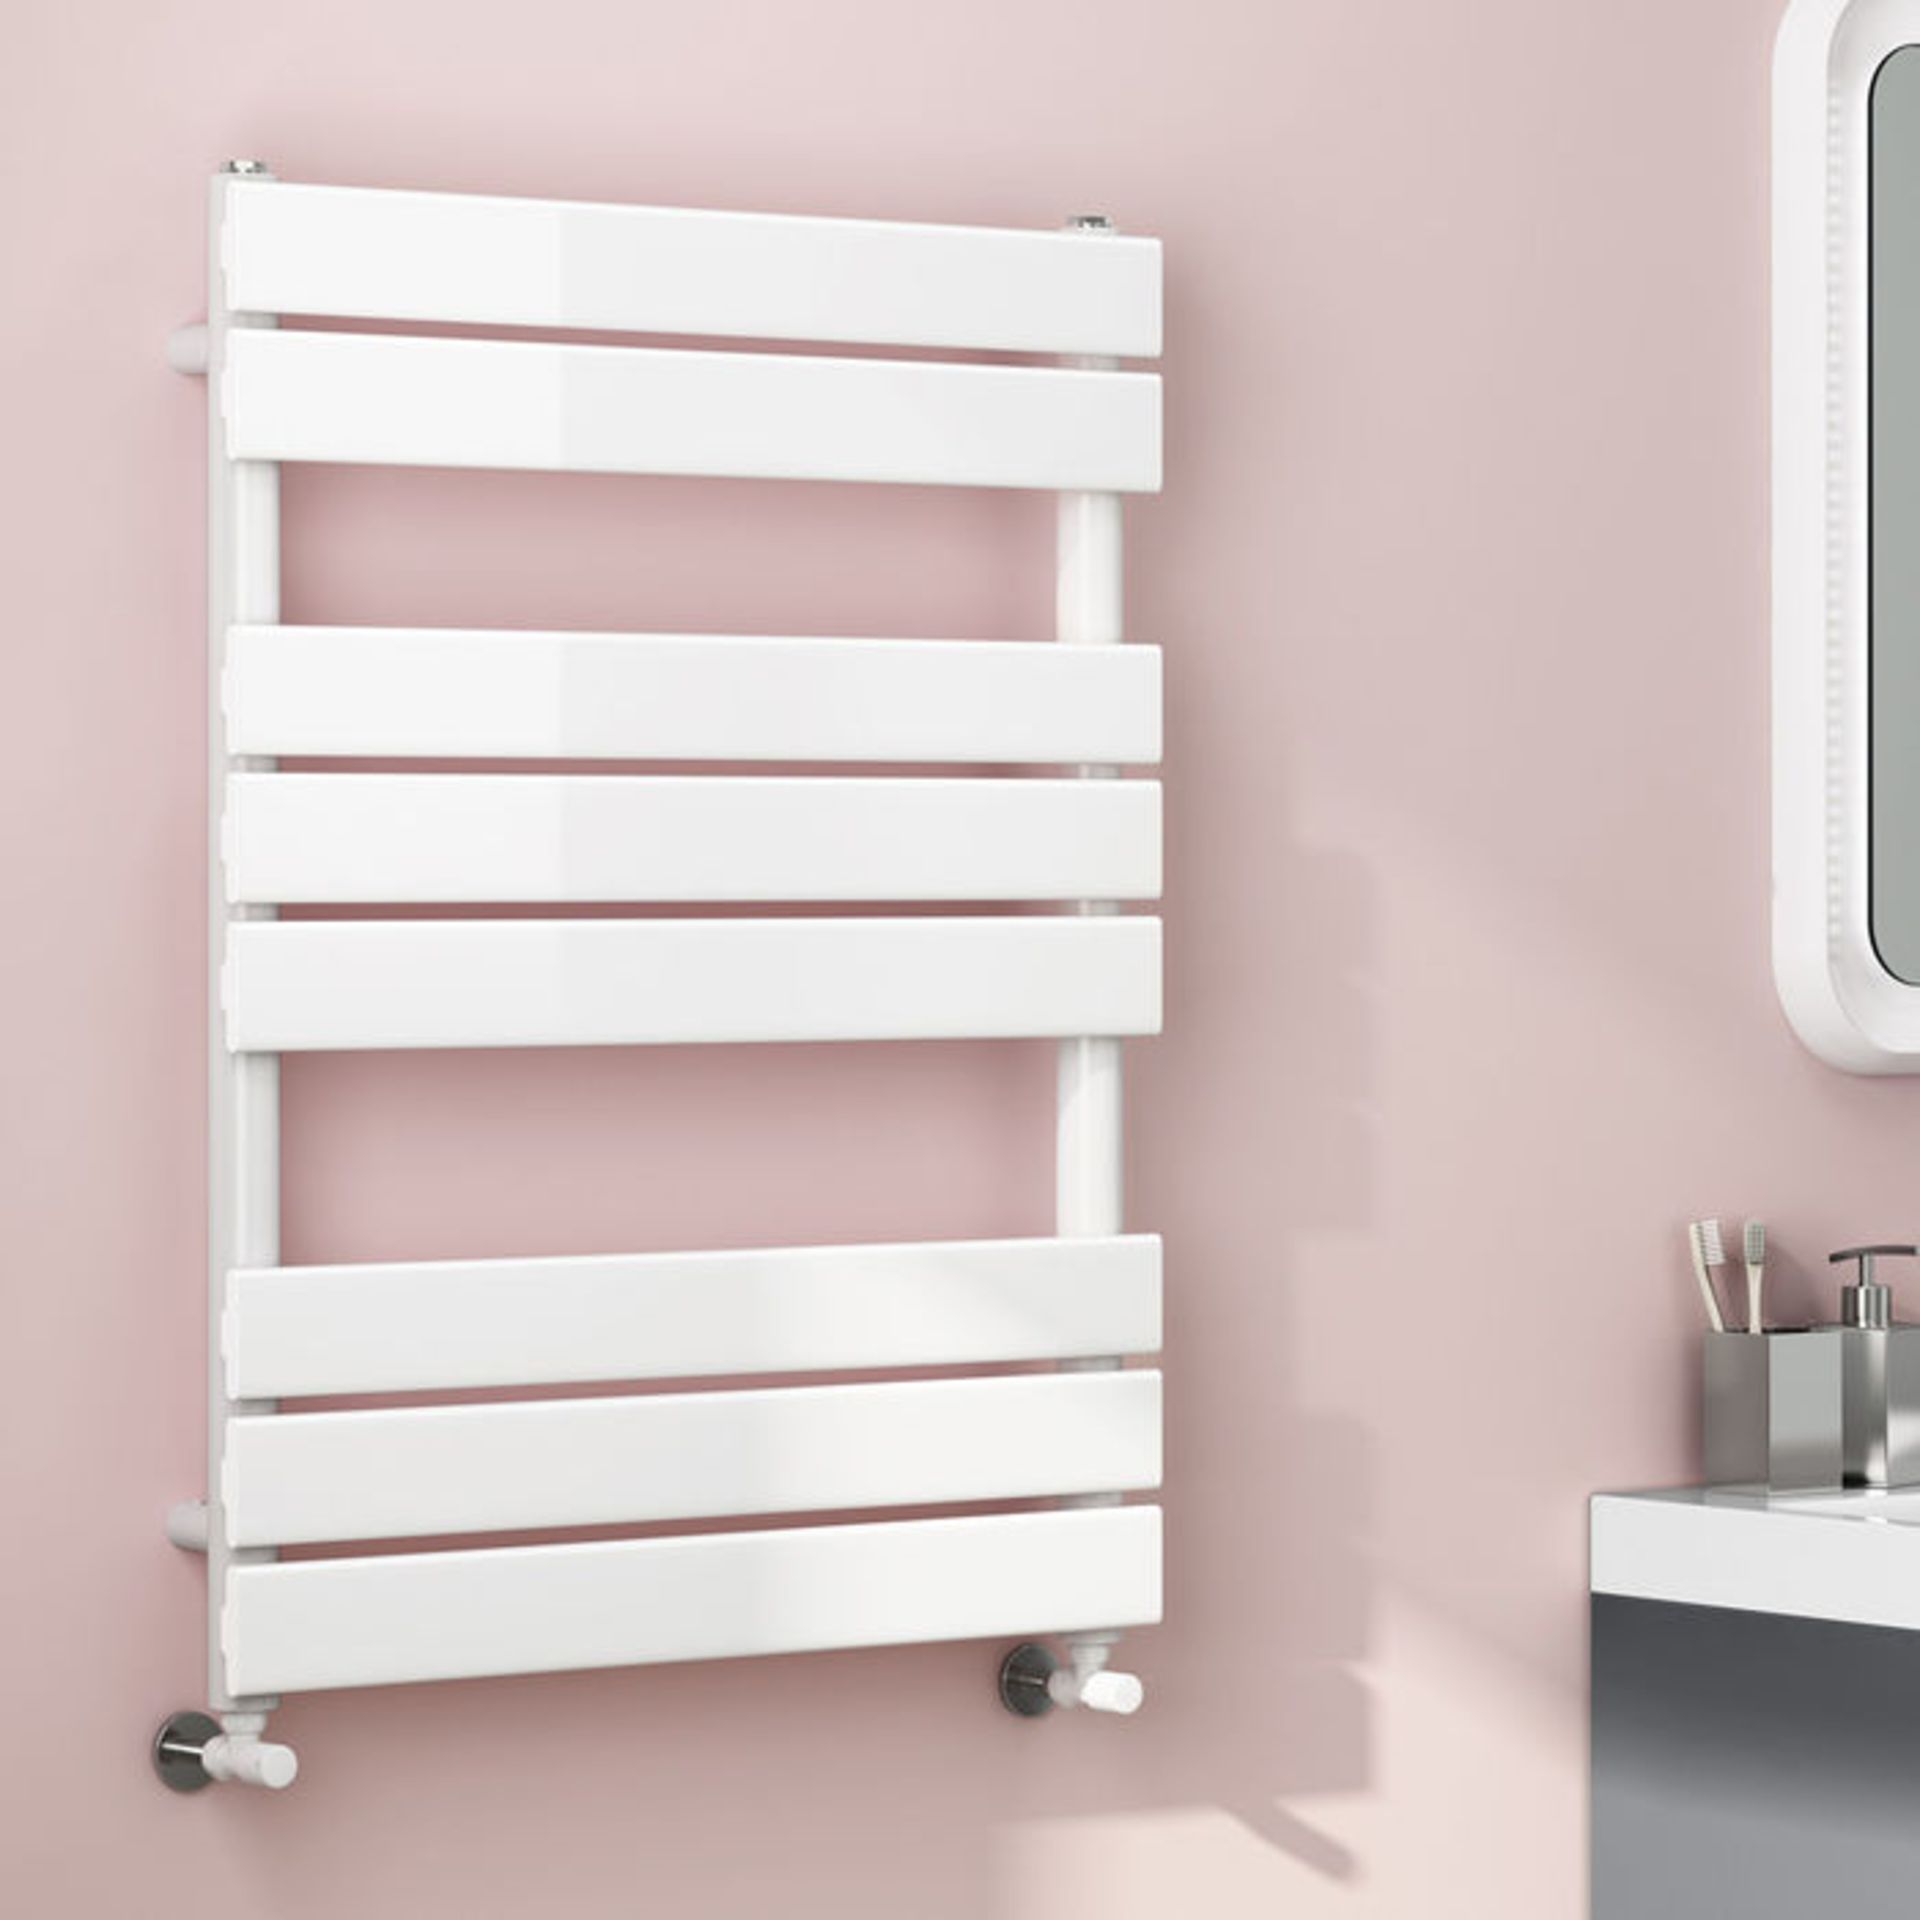 (ZA108) 800x600mm White Flat Panel Ladder Towel Radiator. RRP £176.99. Made from low carbon steel